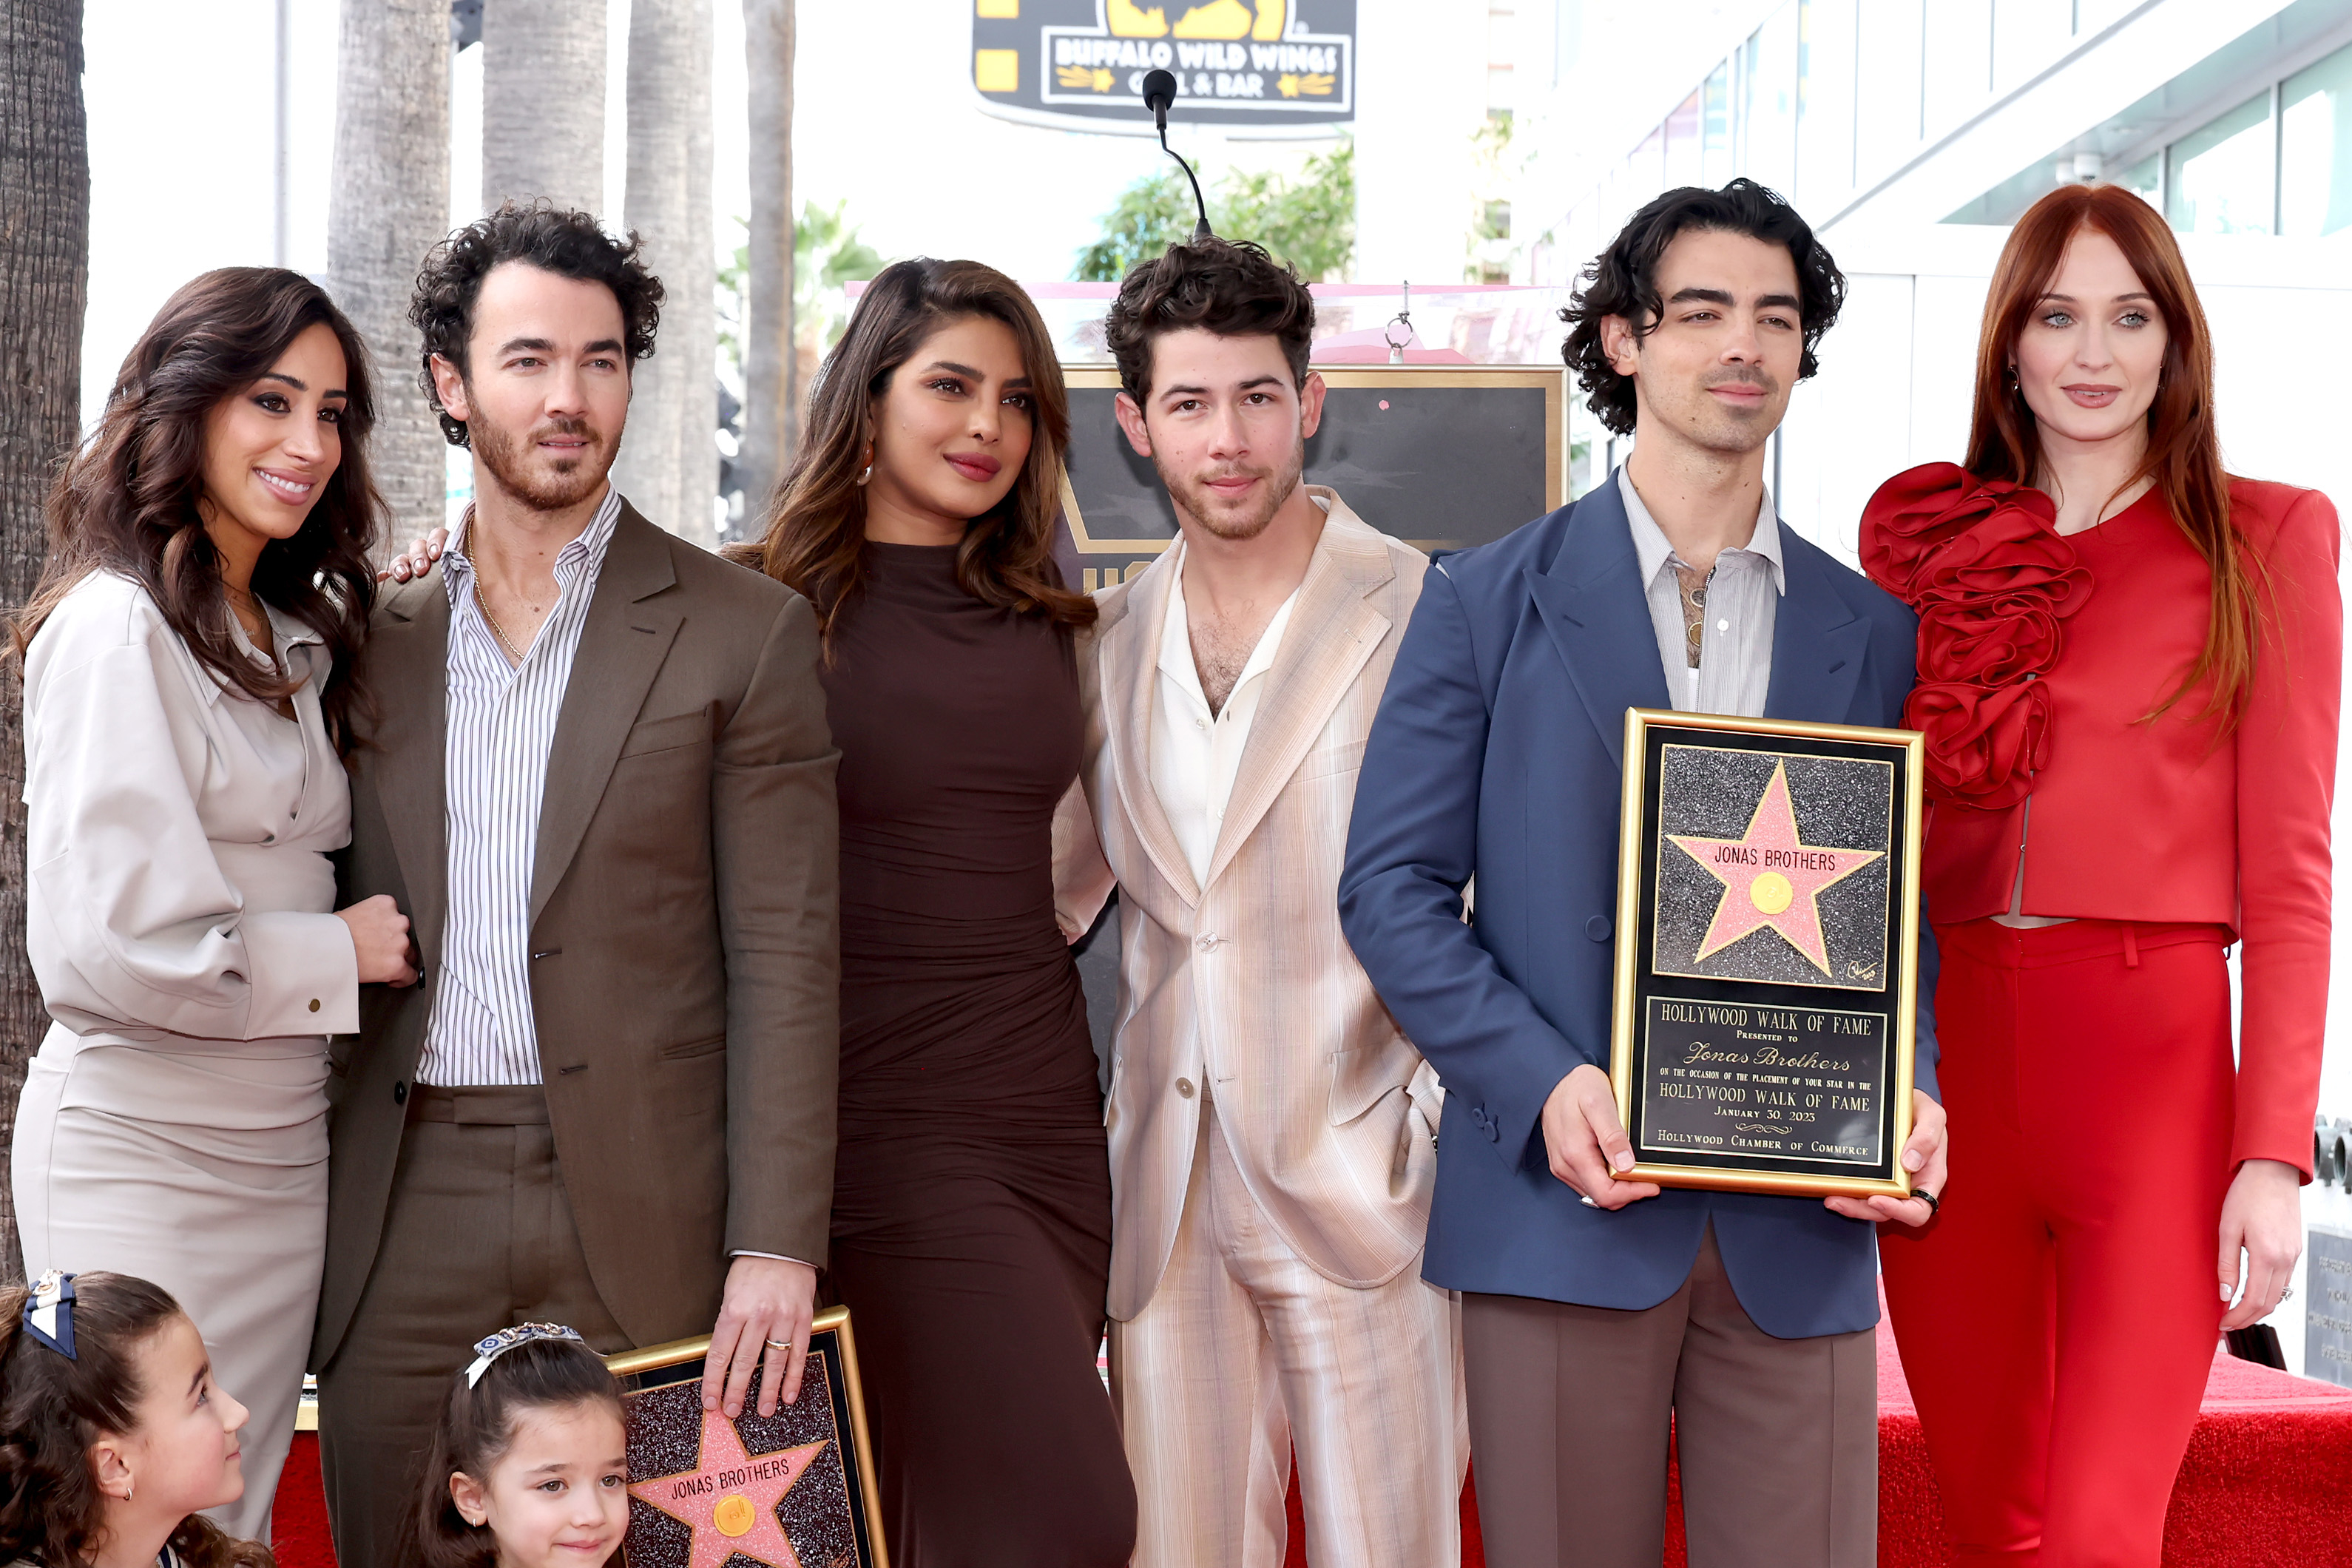 The Jonas Brothers standing with their partners at a media event